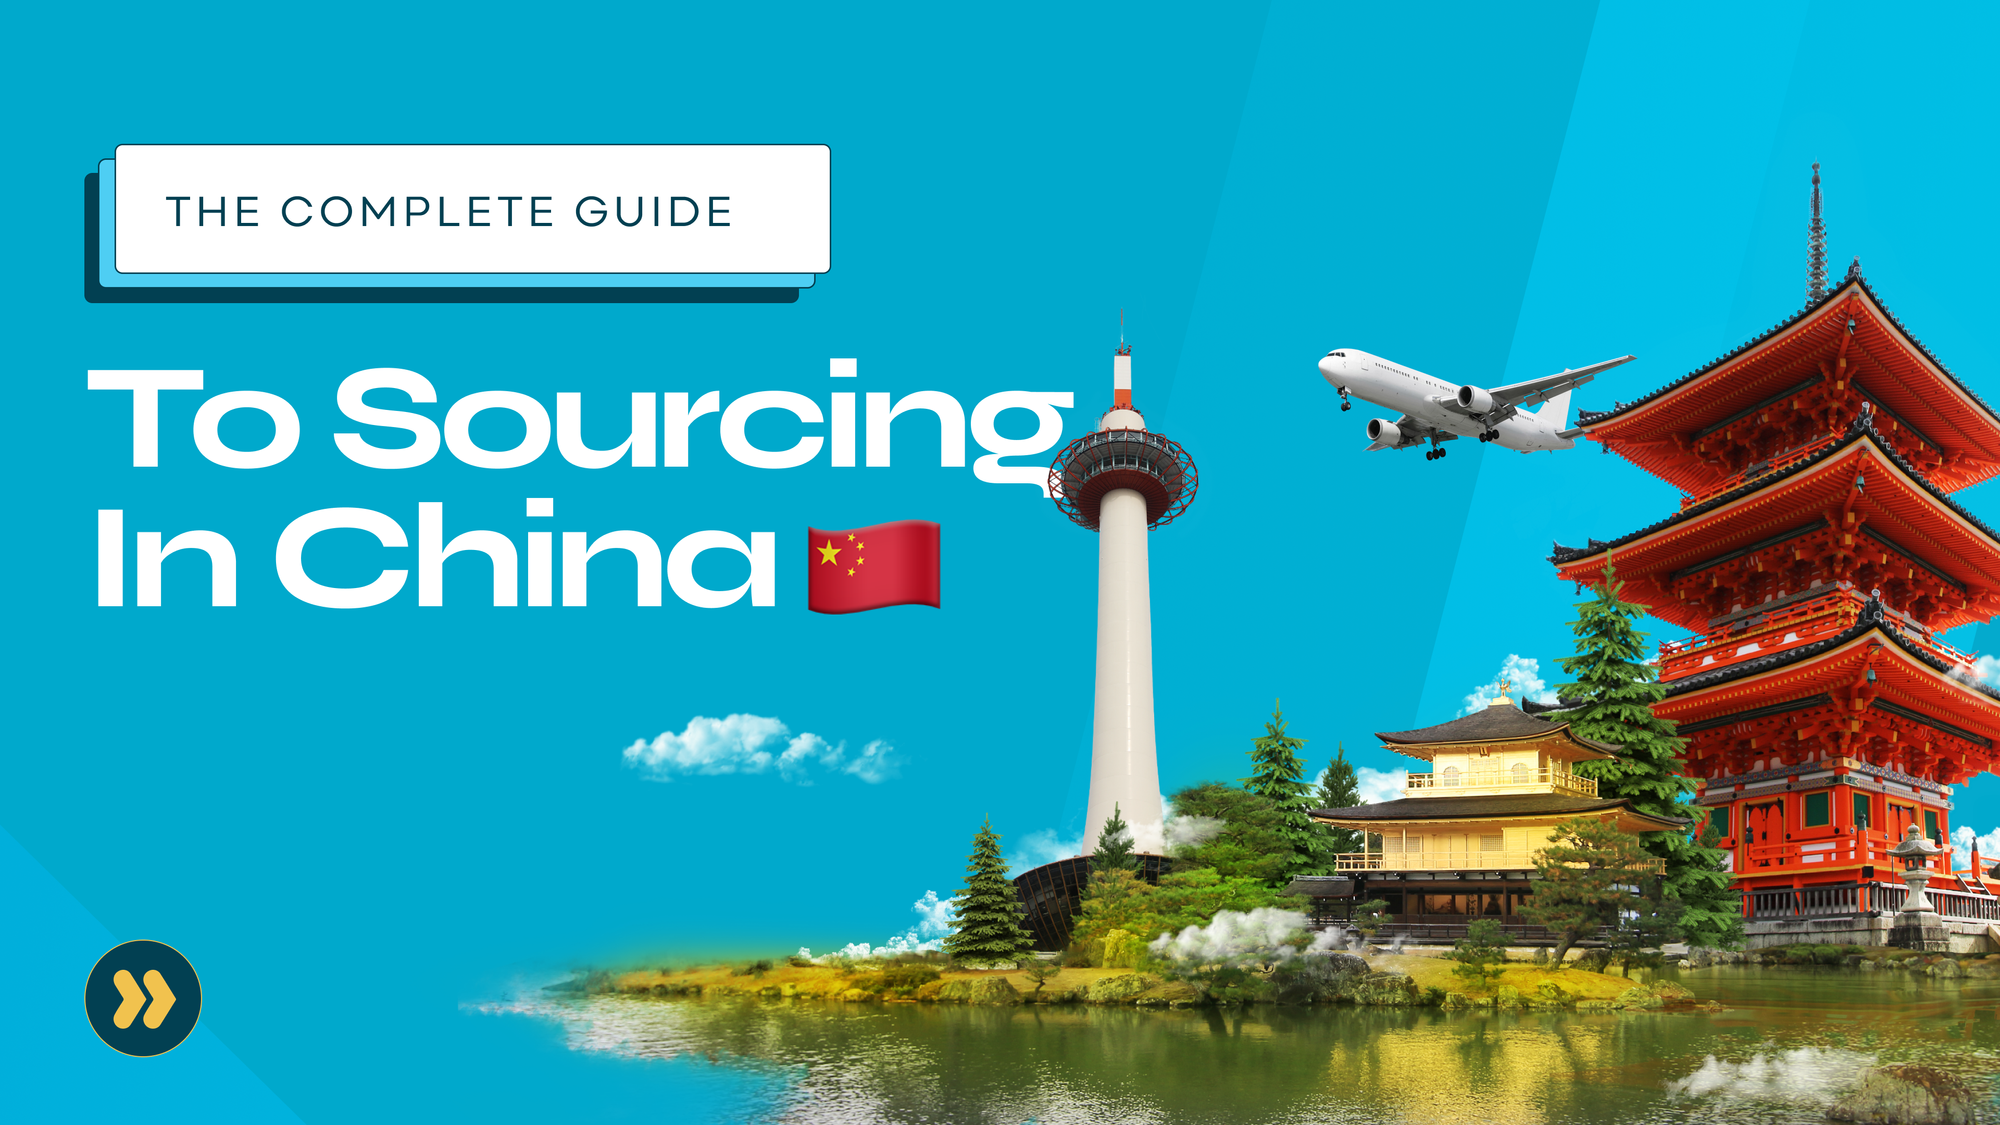 The Complete Guide to Sourcing in China